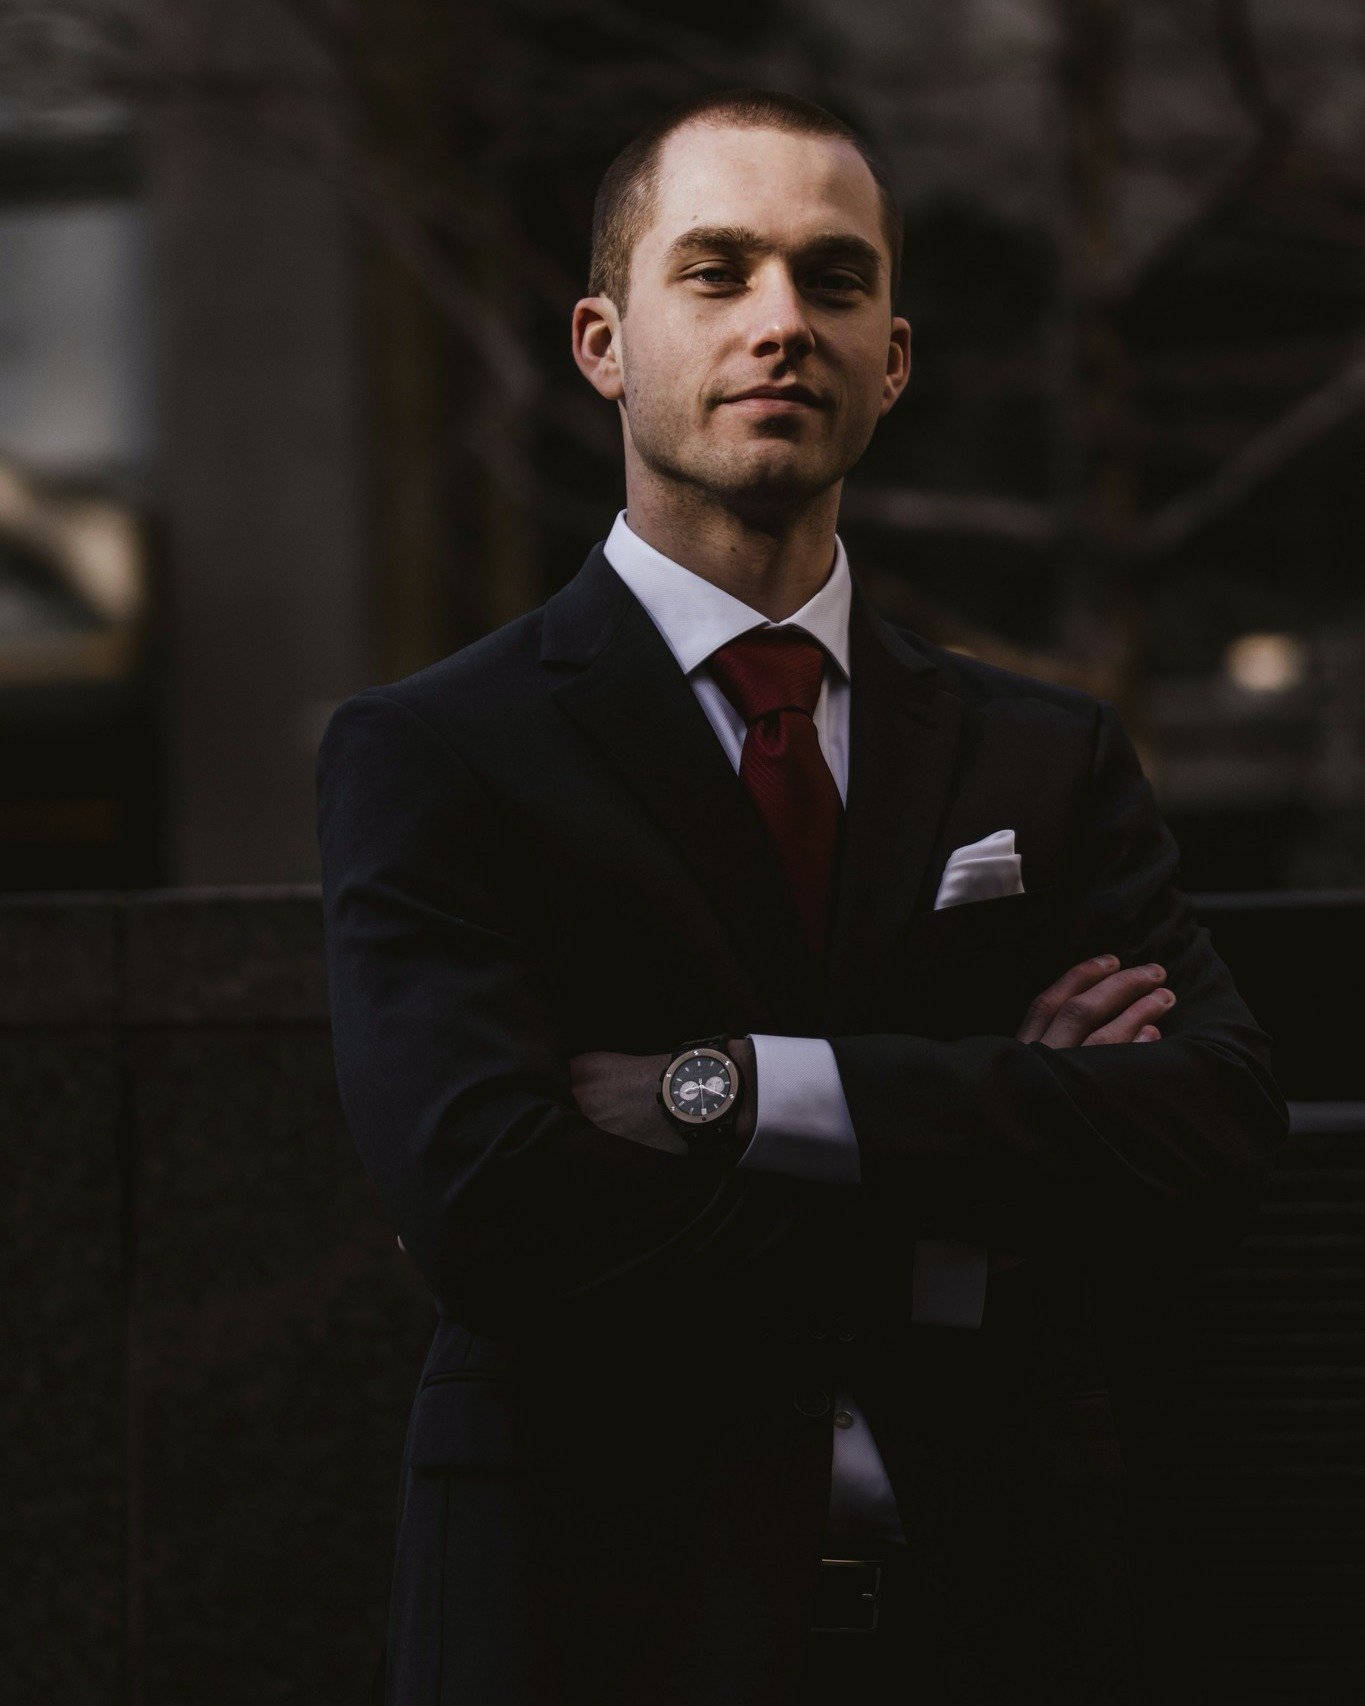 👔 Tailored Elegance: Embrace timeless elegance with Abbott &amp; Jones' tailored business attire. Our suits are expertly crafted from the finest fabrics, tailored to perfection, and finished with exquisite details to ensure you look effortlessly ref